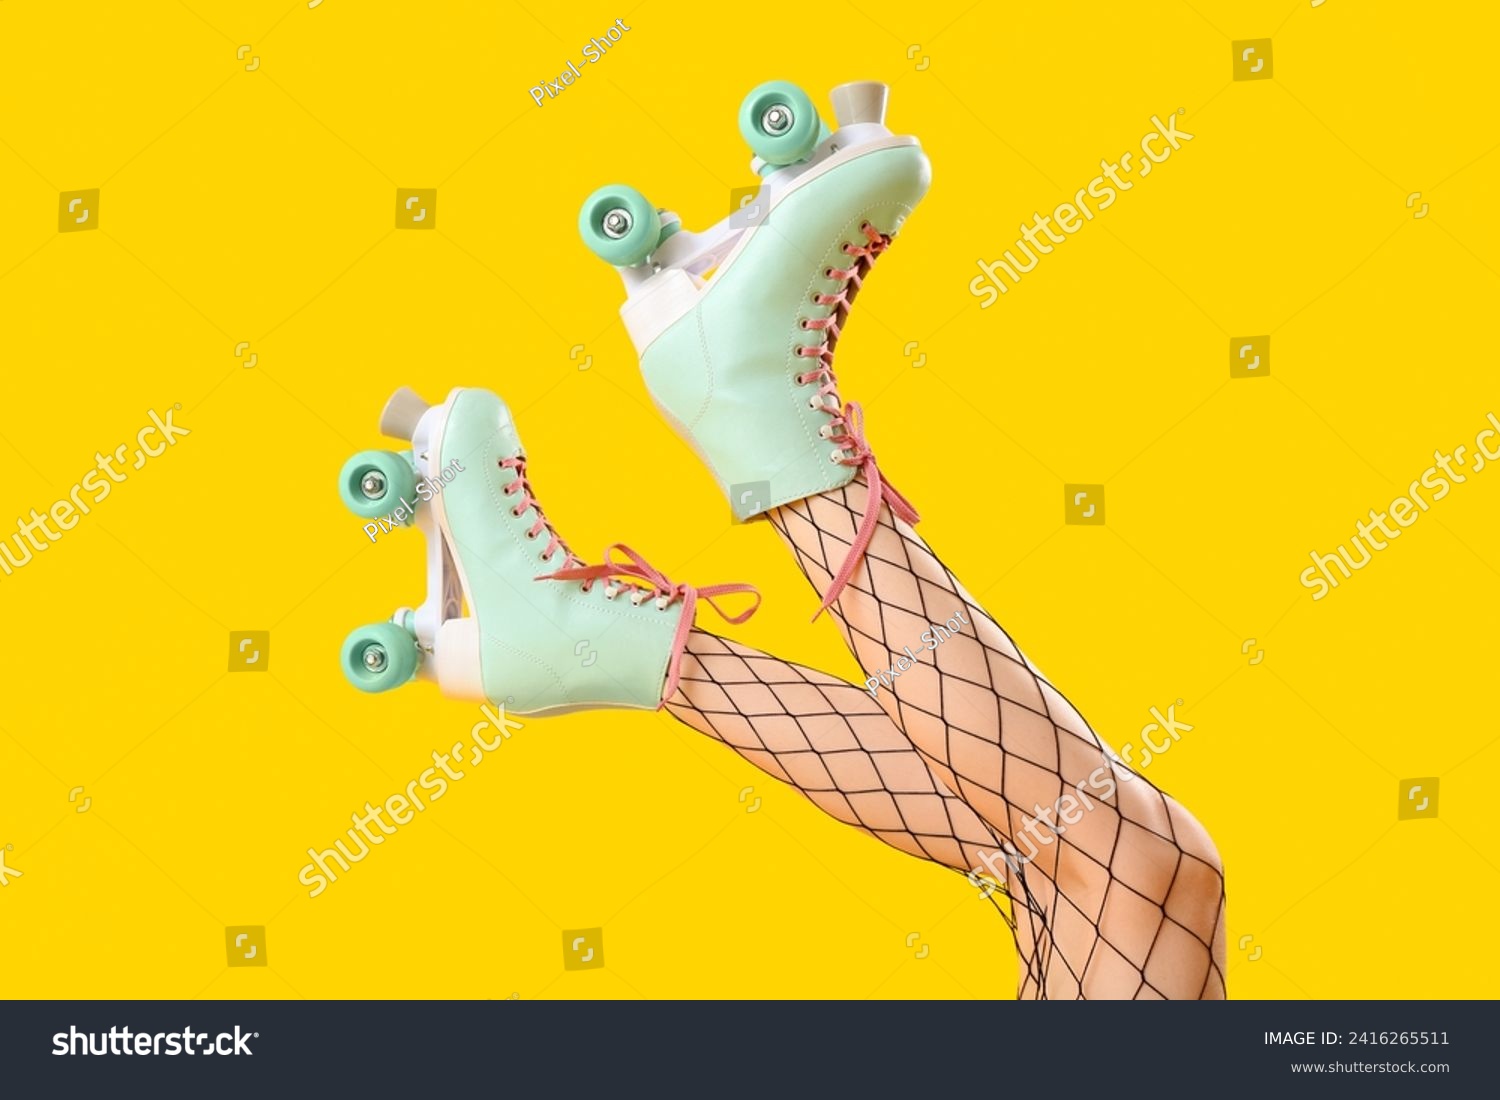 Legs of woman in roller skates on yellow background #2416265511